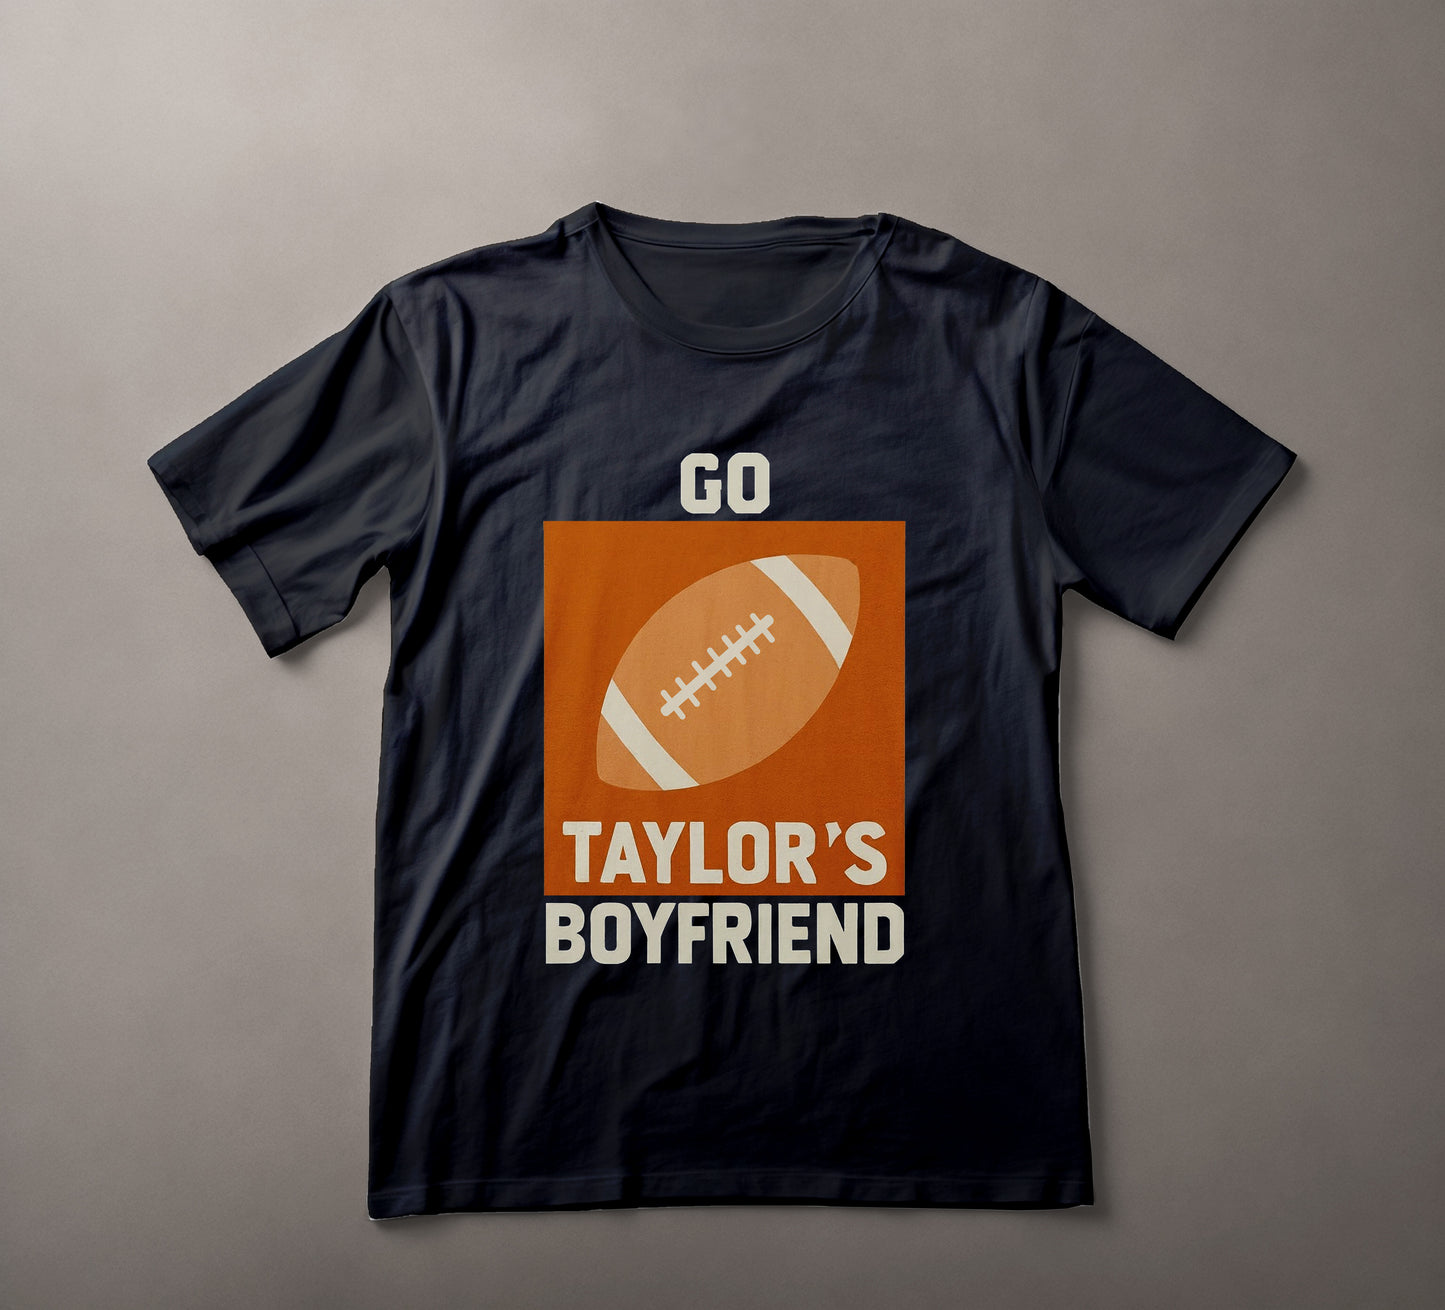 Football Fan T-Shirt, Sports Relationship Shirt, Supportive Boyfriend Tee, Custom Football Shirt, Personalized Sports Apparel, Tailgate Party Clothing, Game Day T-Shirt, Couple's Sports Gear, Football Season Tee, Boyfriend Support T-Shirt